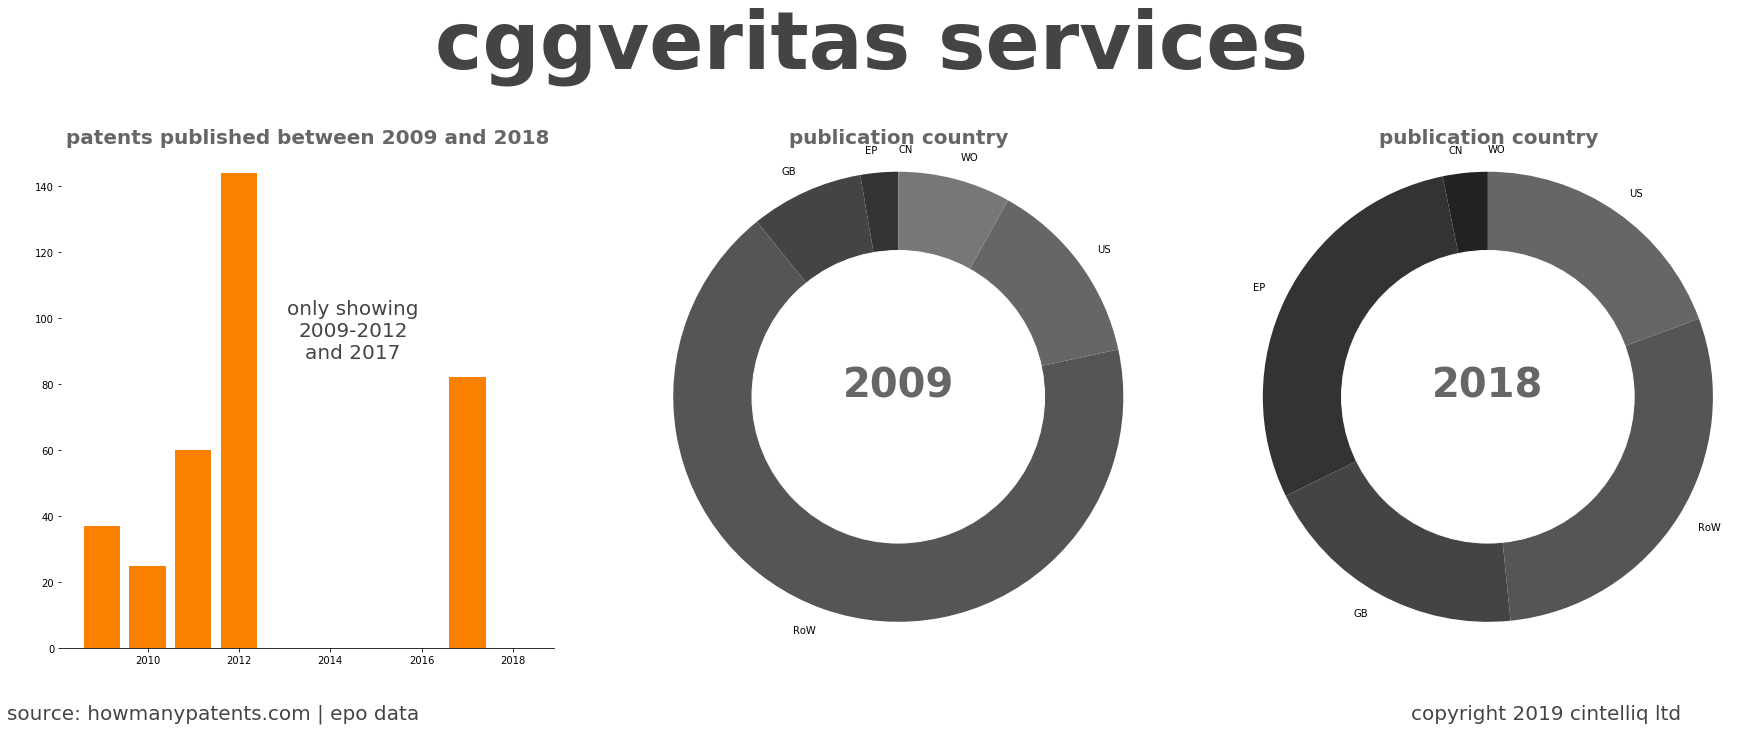 summary of patents for Cggveritas Services